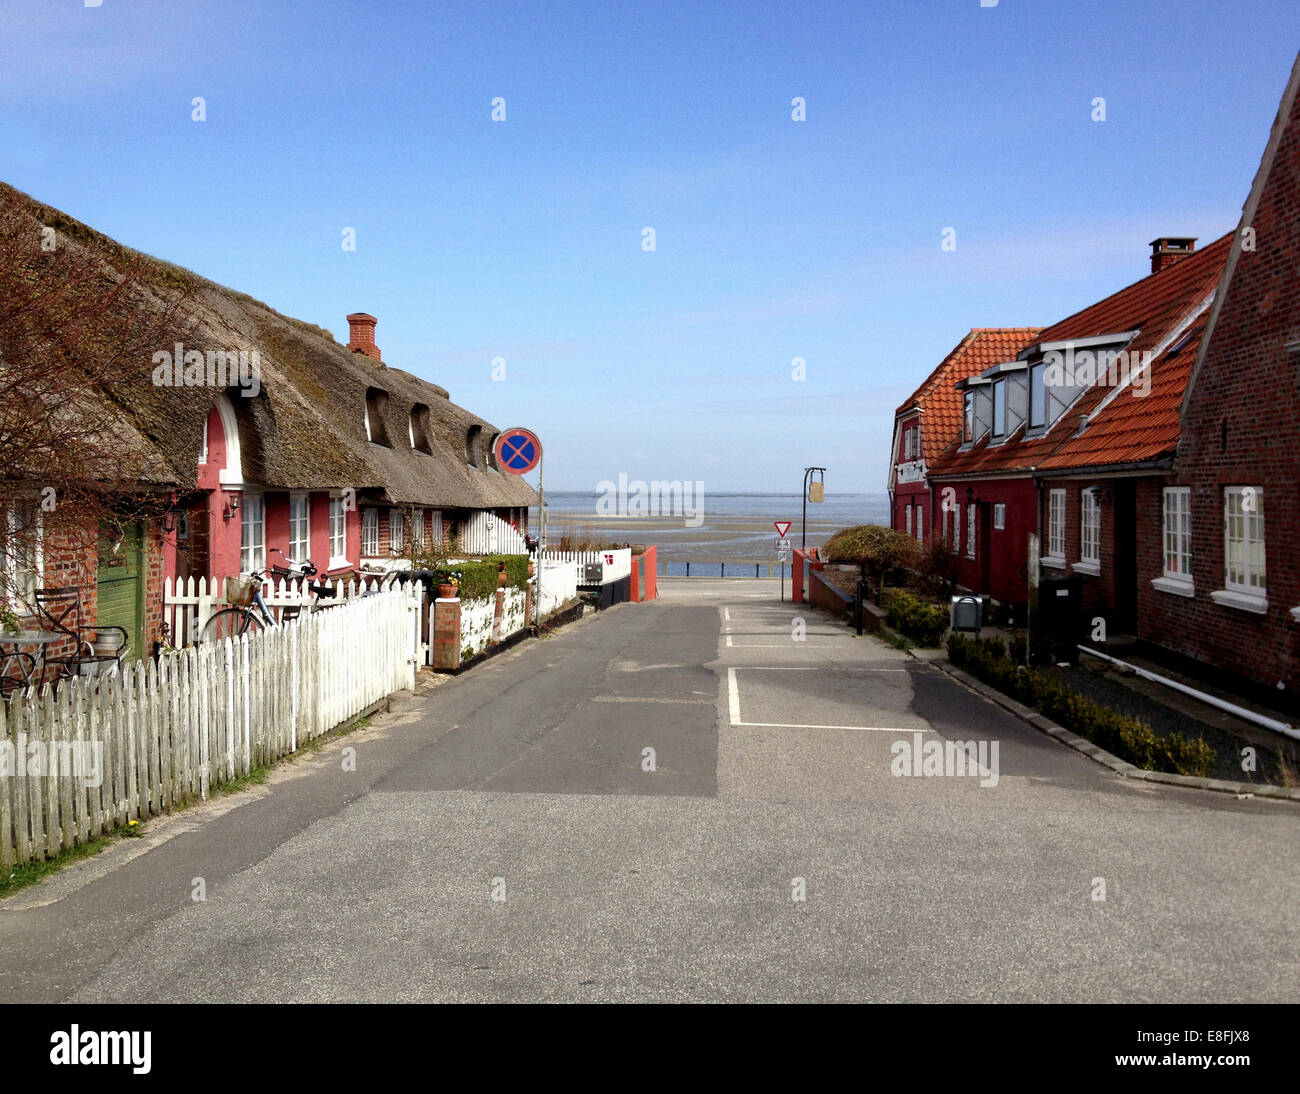 Traditional thatched cottages, Fanoe, Denmark Stock Photo